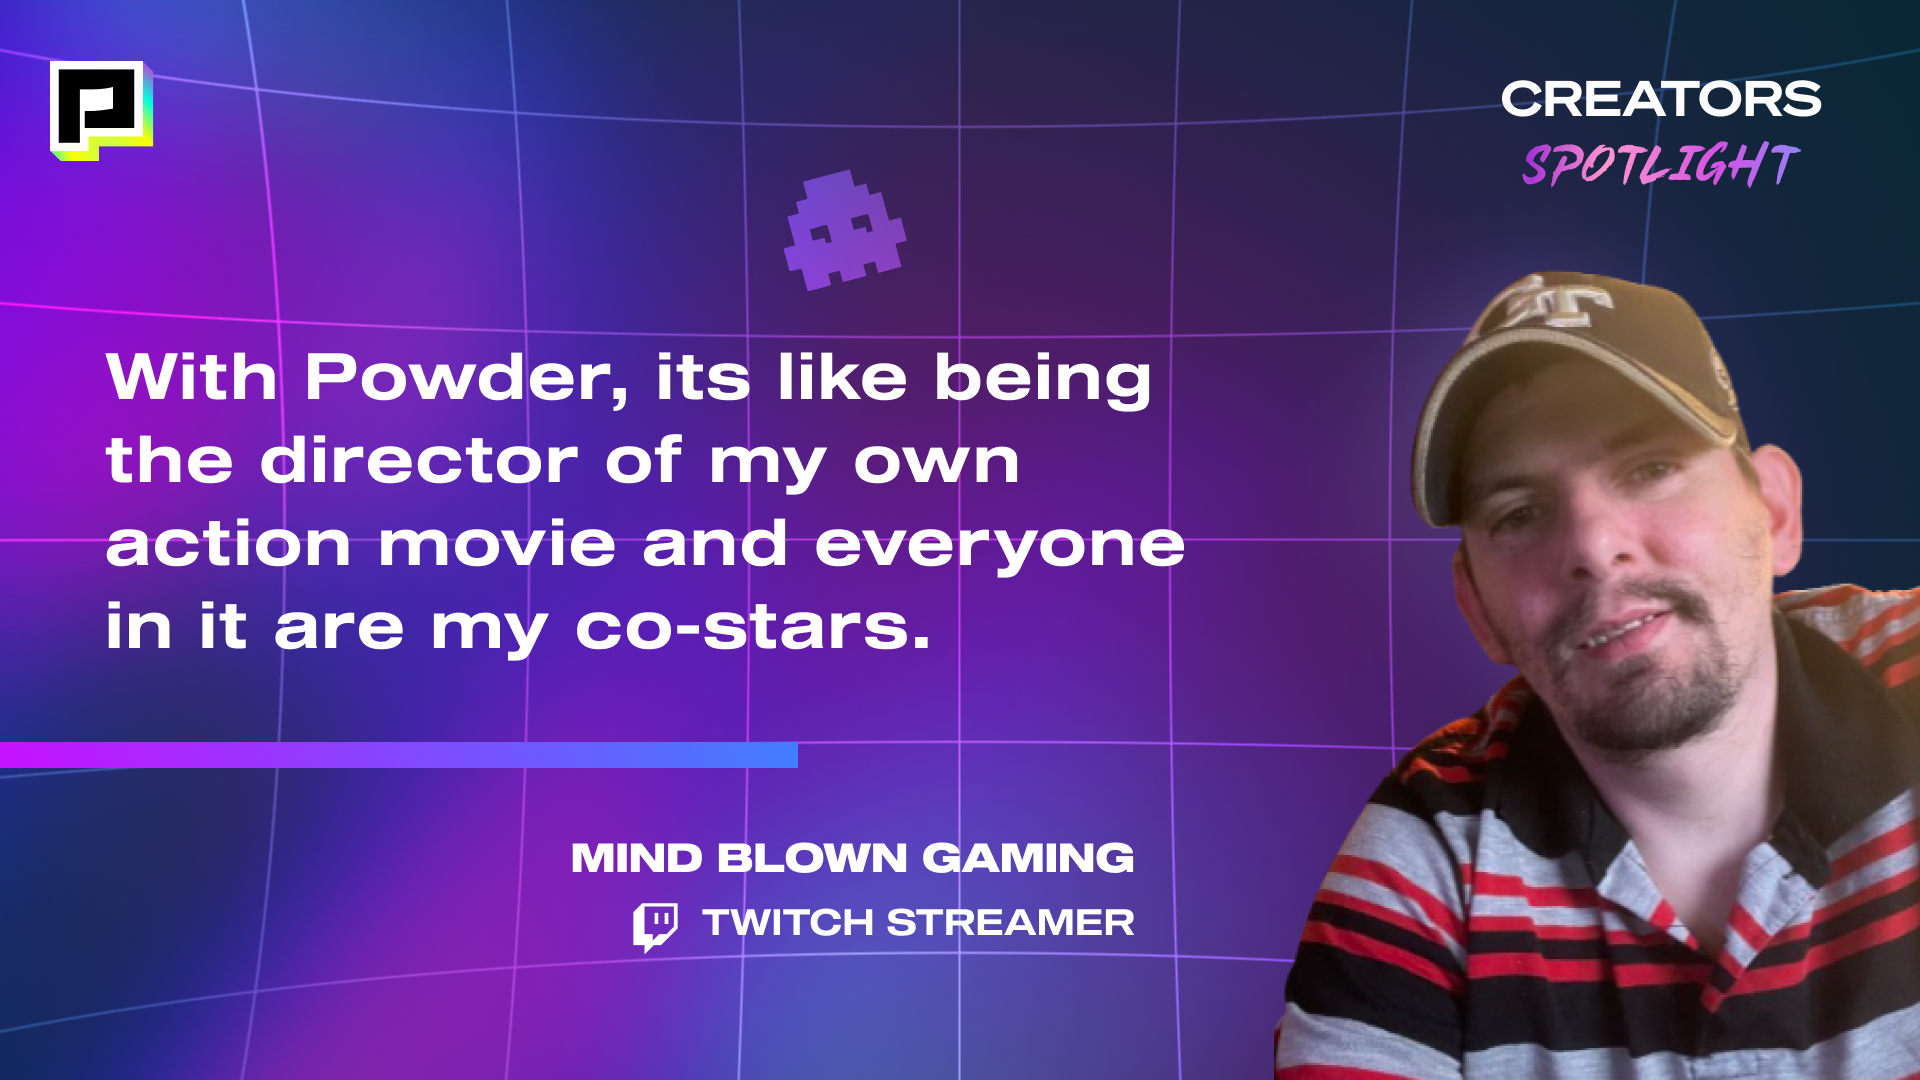 Image of Twitch Streamer, MIND BLOWN GAMING with his quote, "With Powder, its like being the director of my own action movie and everyone in it are my co-starts."